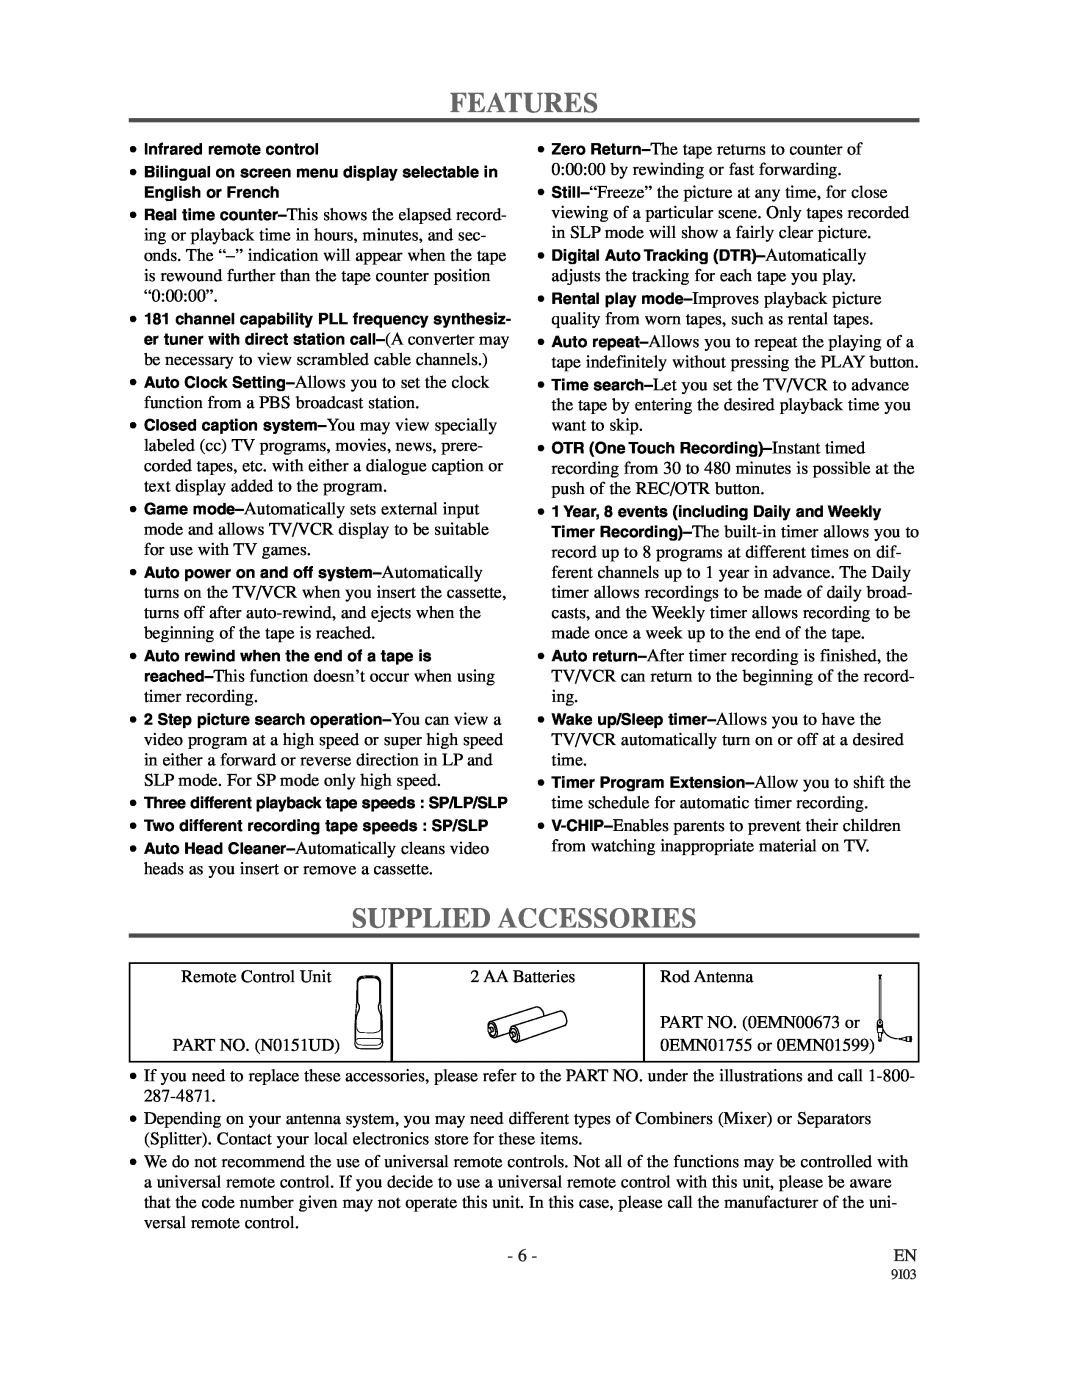 Emerson EC1320C owner manual Features, Supplied Accessories 